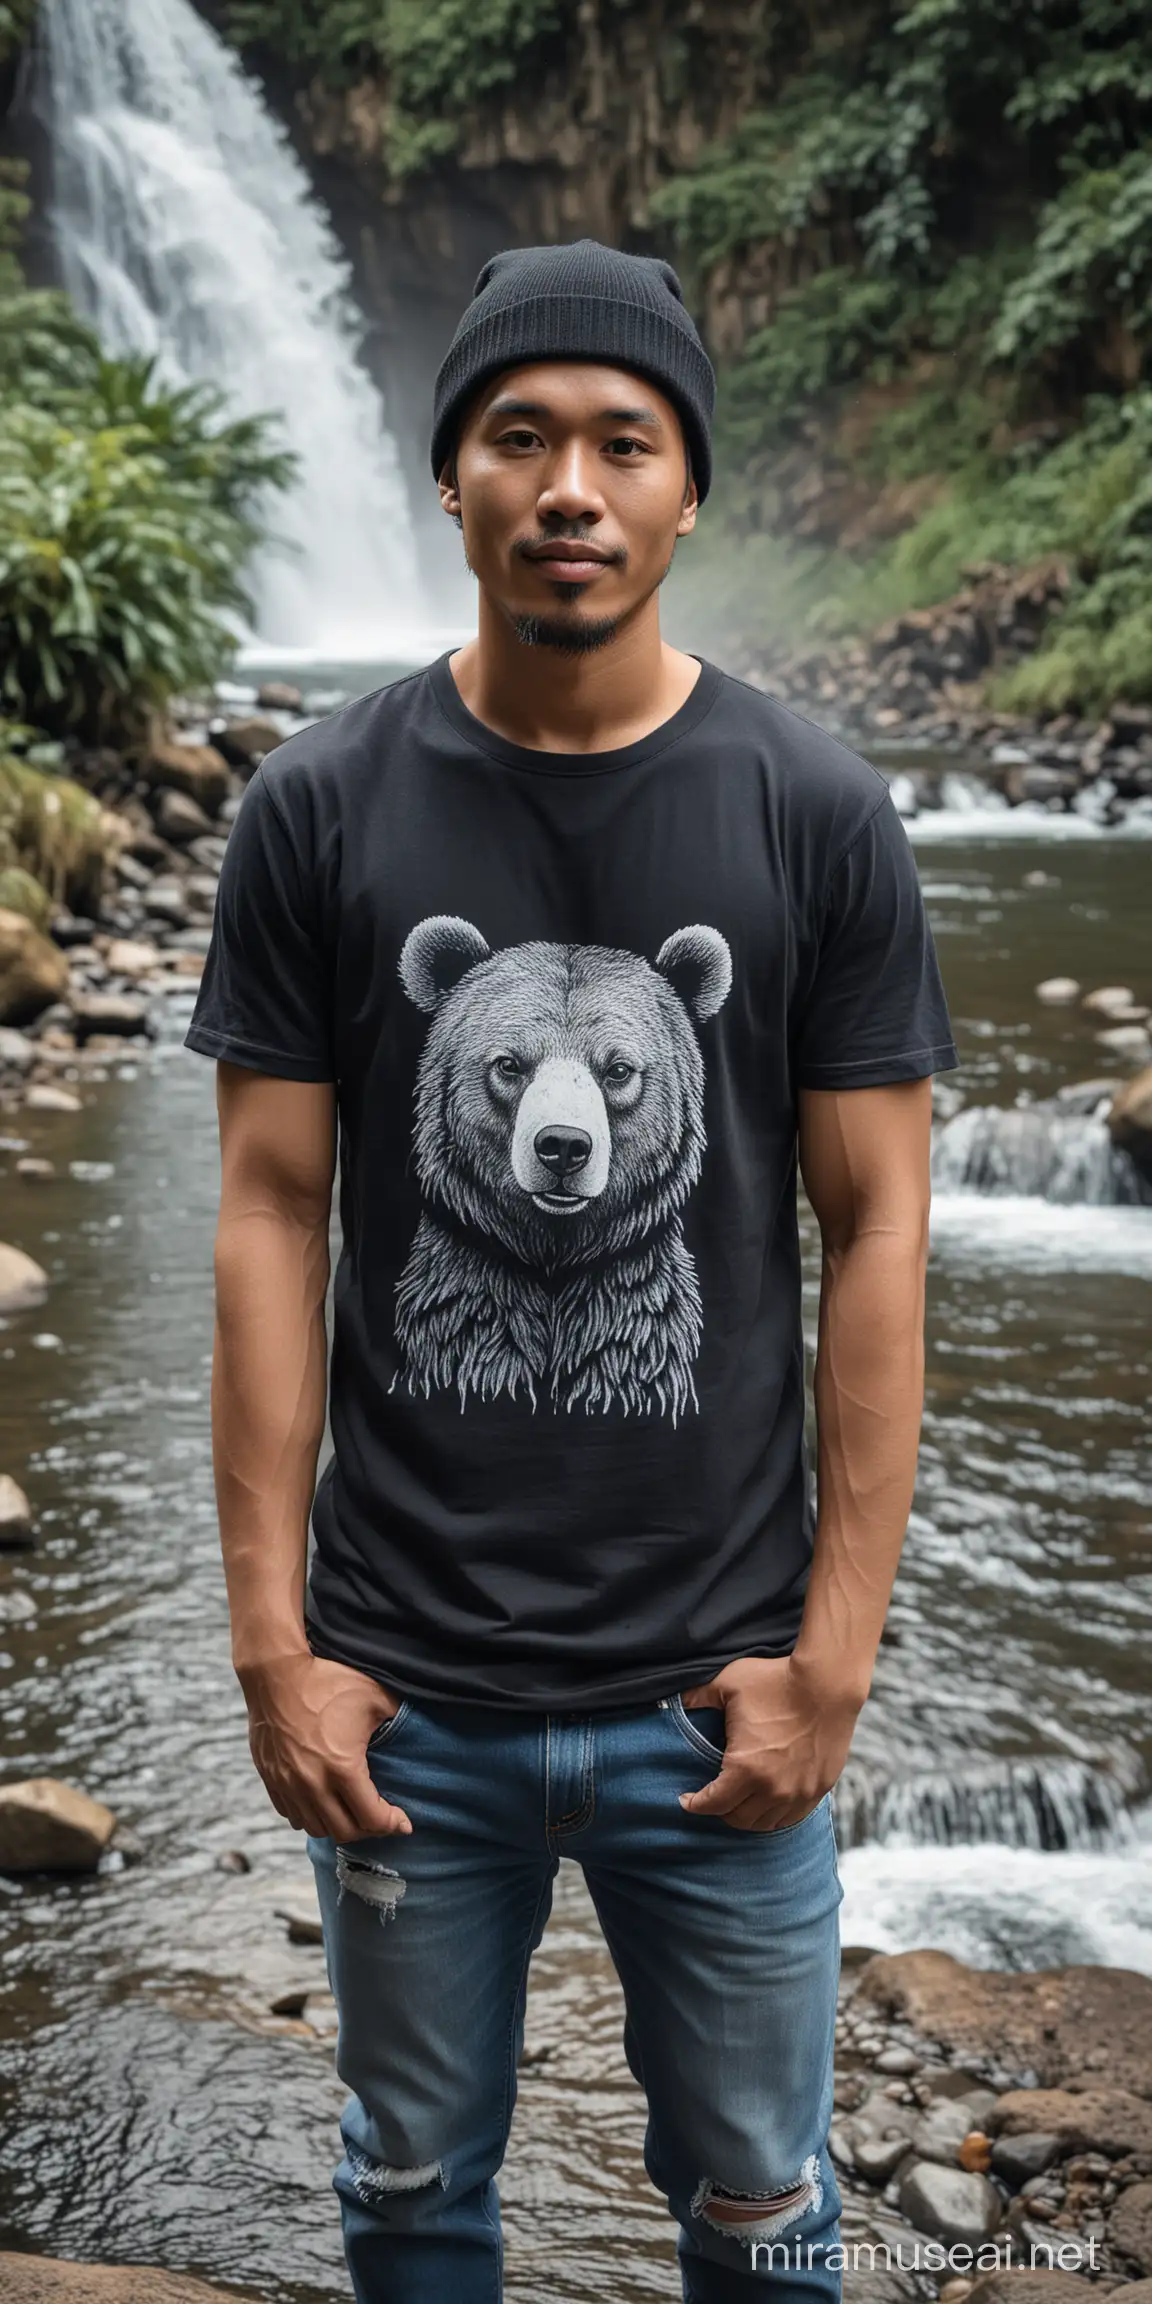 Indonesian Man in Black Beanie by Waterfall Casual Outdoor Portrait